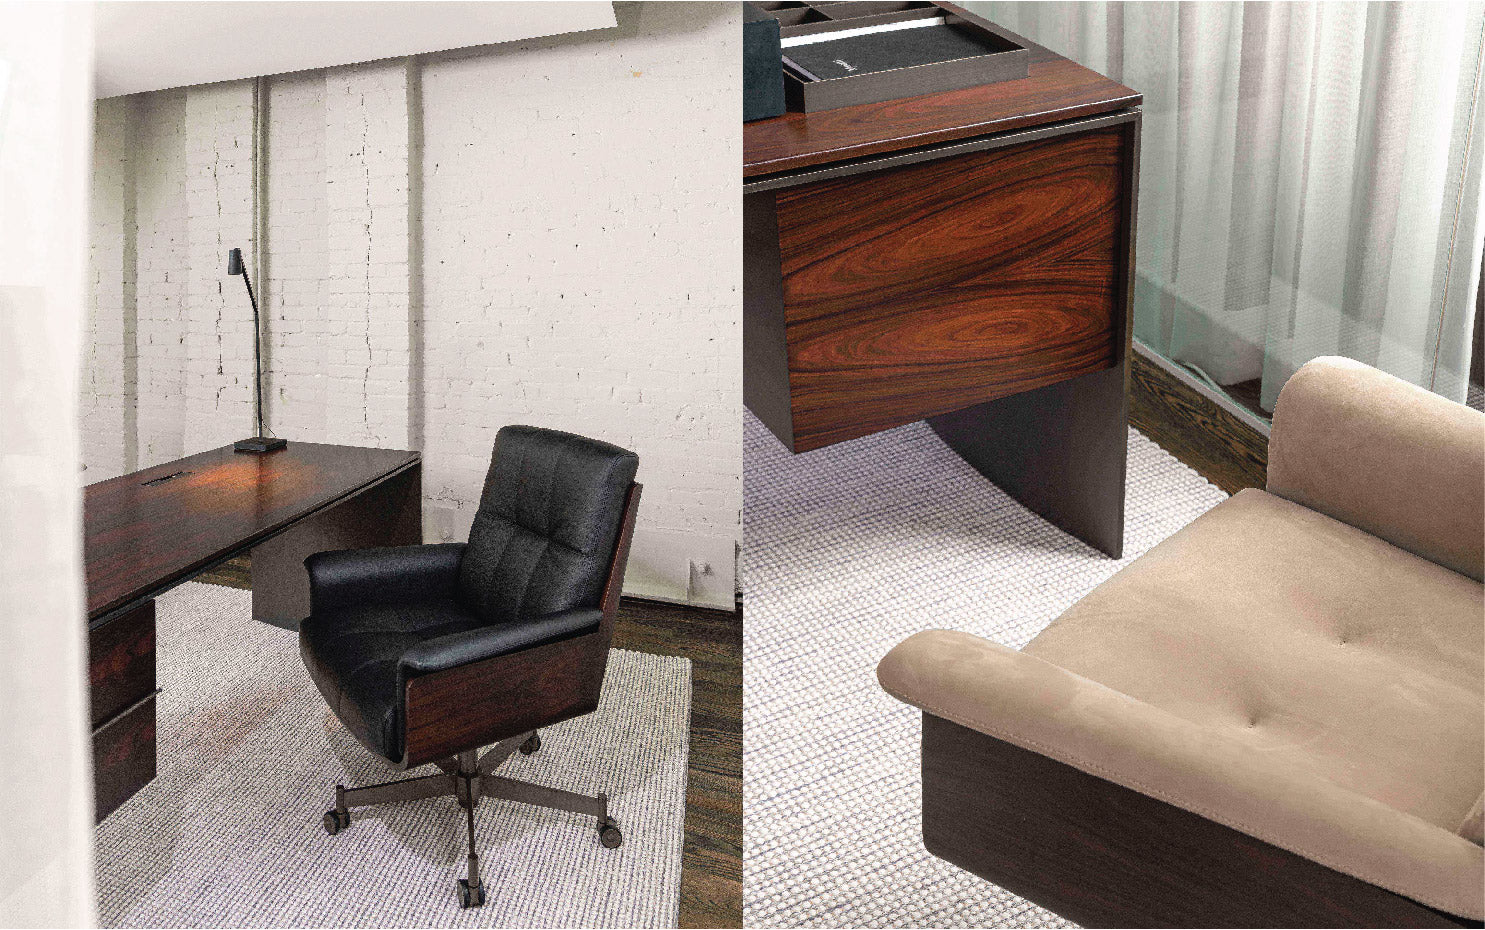 The first official work chair from Minotti – Daiki Studio and the Linha Studio desk designed by Marcio Kogan / studio mk27.